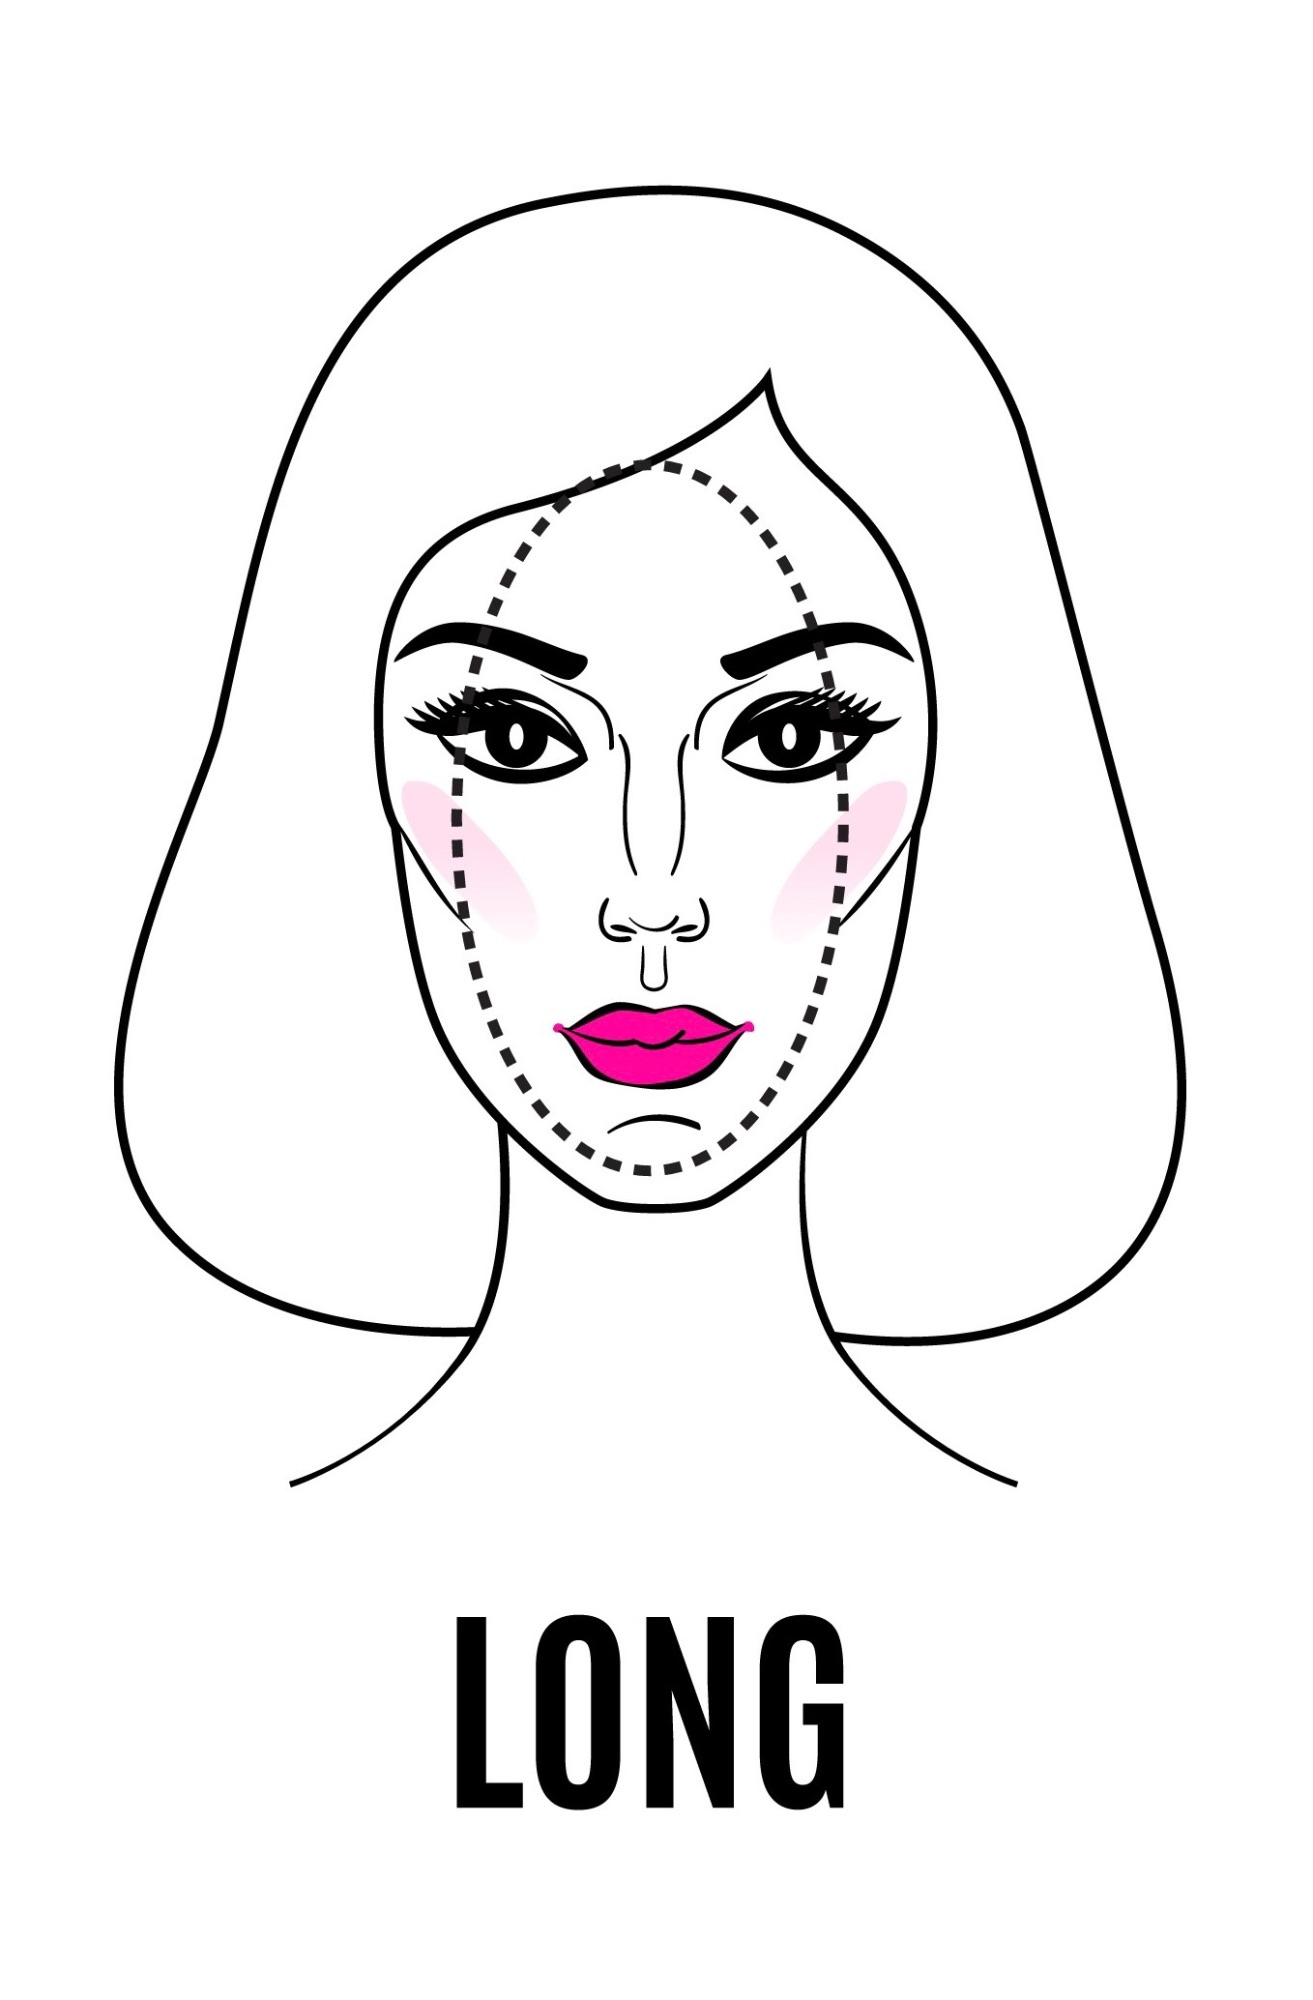 Drawing of a long shaped face